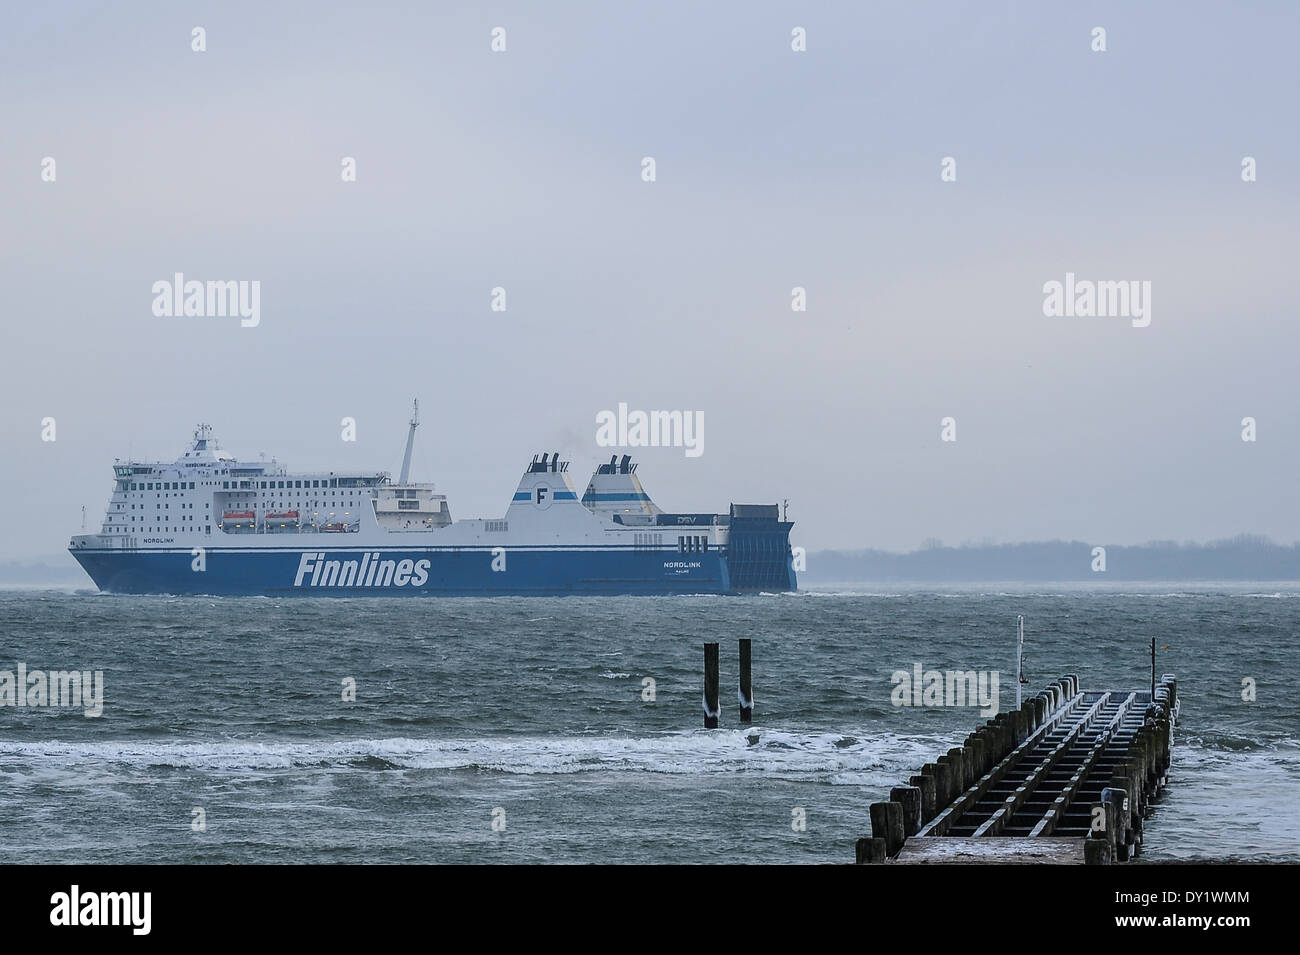 Impression at the Baltic Sea with ferry, Szene an der Ostsee mit Fähre Stock Photo